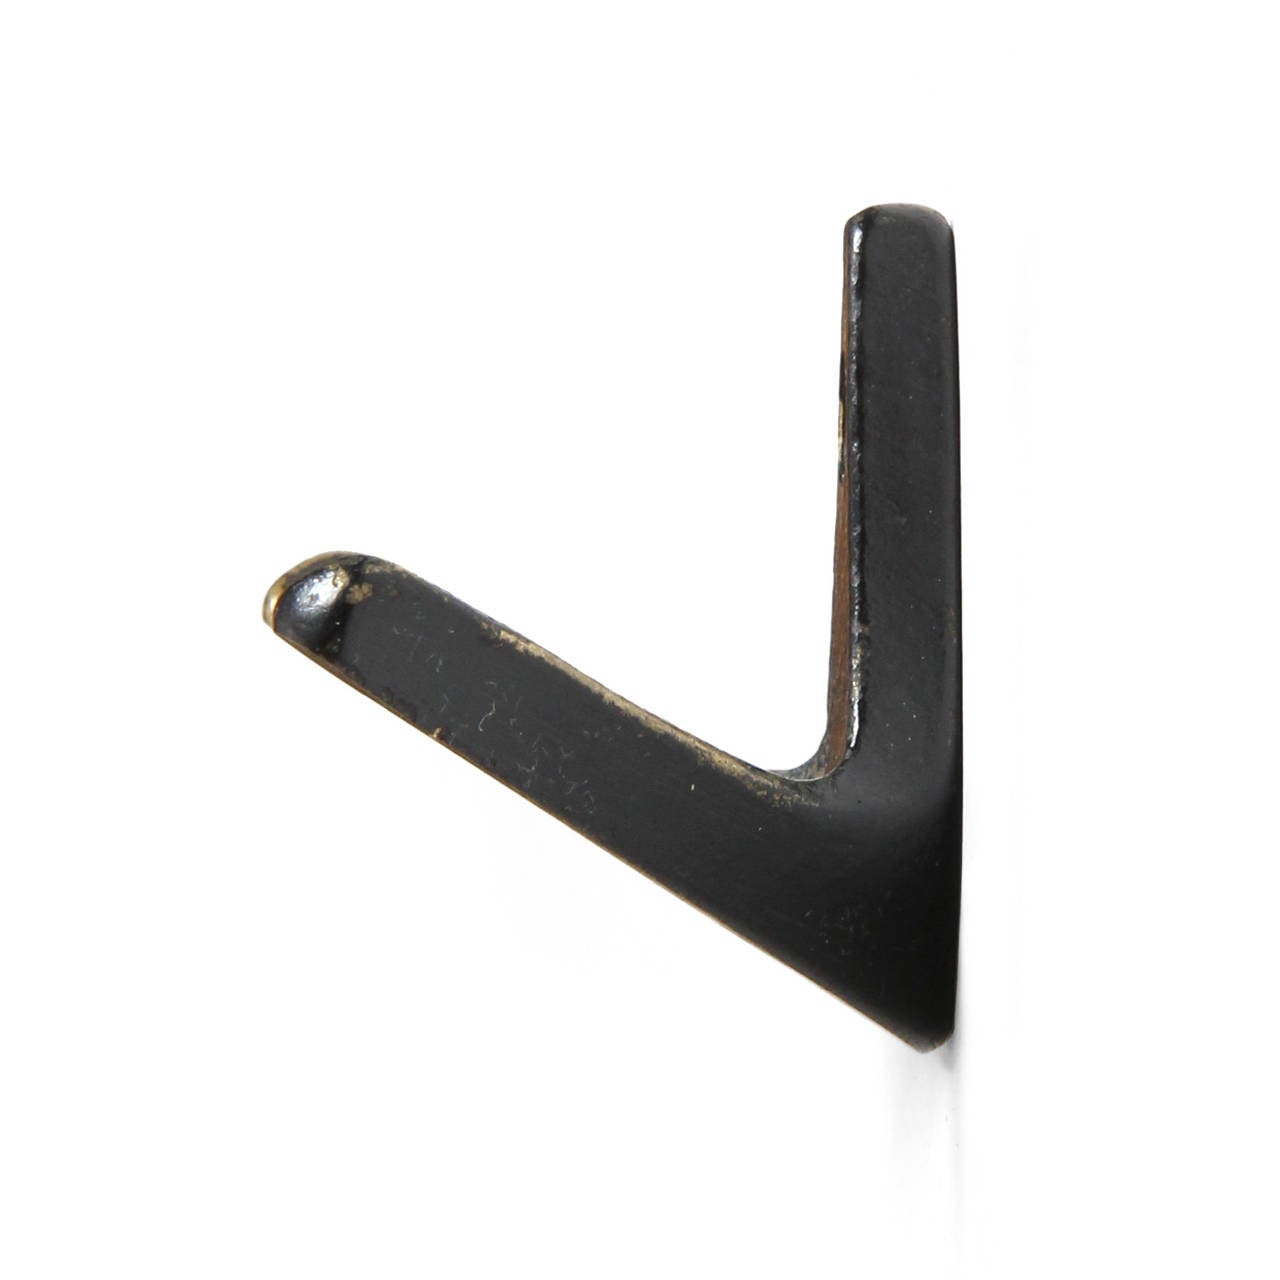 A sculptural modernist wall mounted coat hook well crafted of patinated bronze.